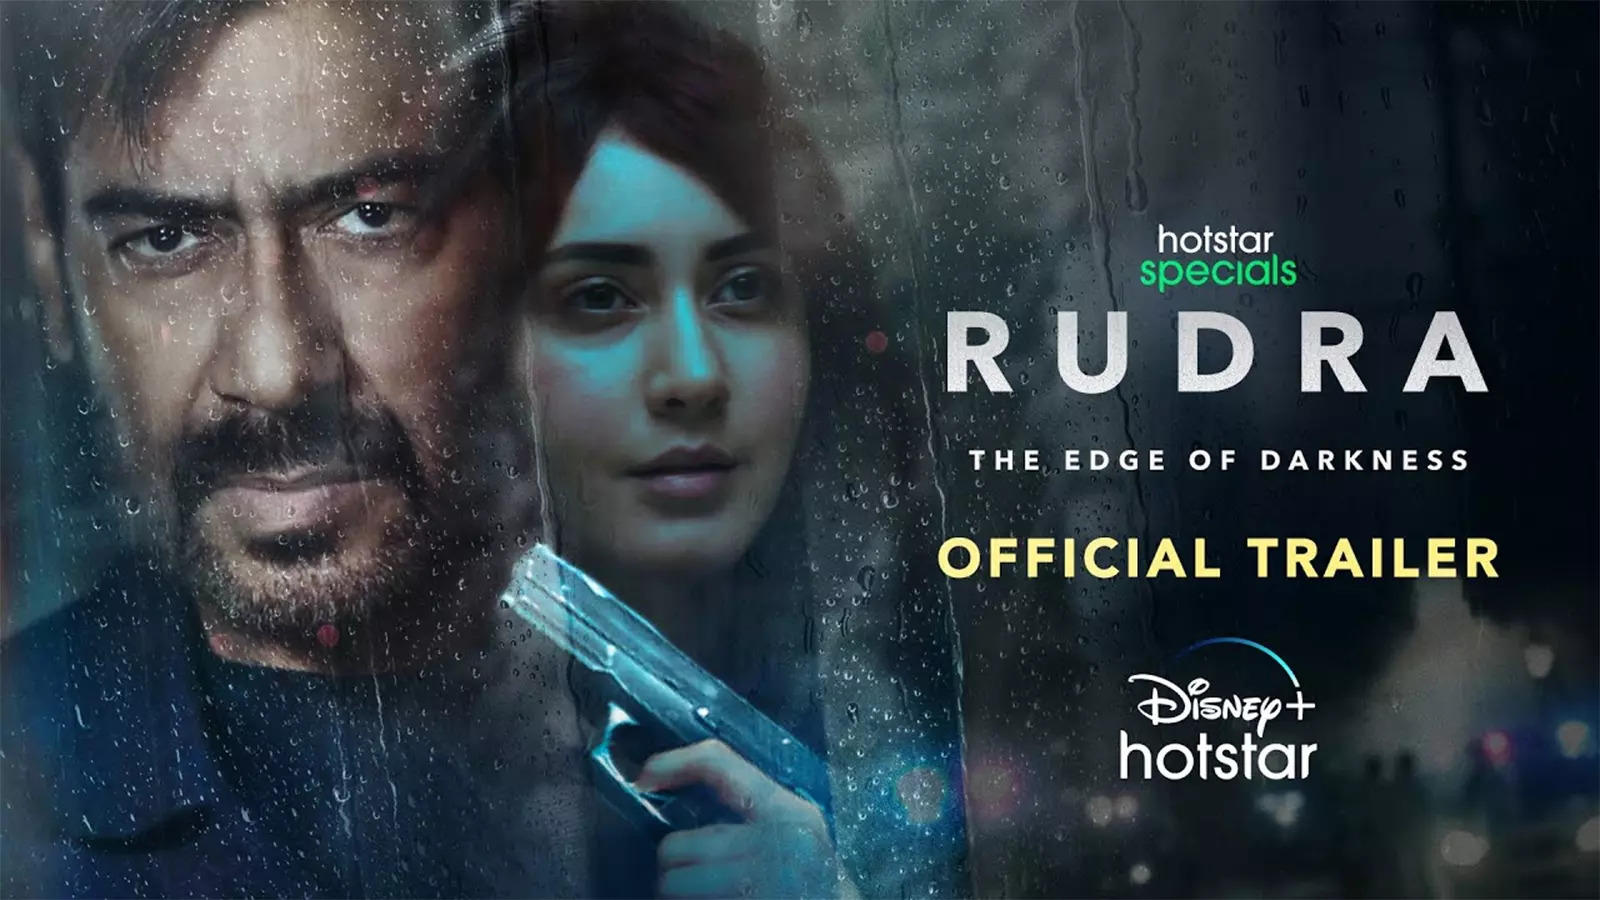 Rudra the edge of darkness